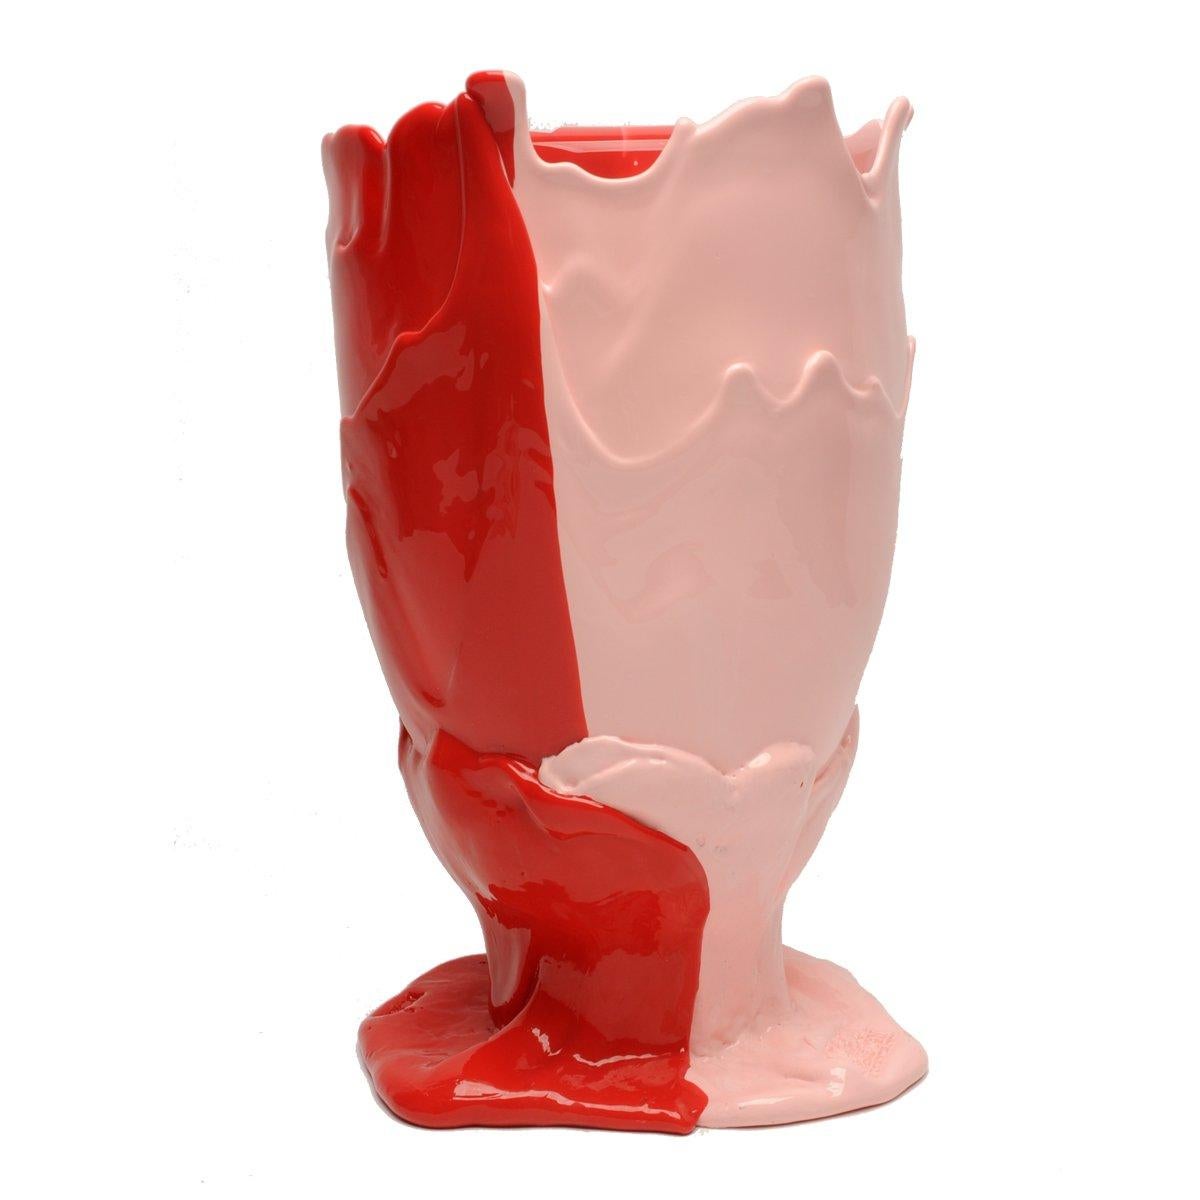 Twin-C vase, matt pink and red.

Vase in soft resin designed by Gaetano Pesce in 1995 for Fish Design collection.

Measures: L - ø 22cm x H 36cm

Other sizes available.

Colours: Matt pink and red.

Vase in soft resin designed by Gaetano